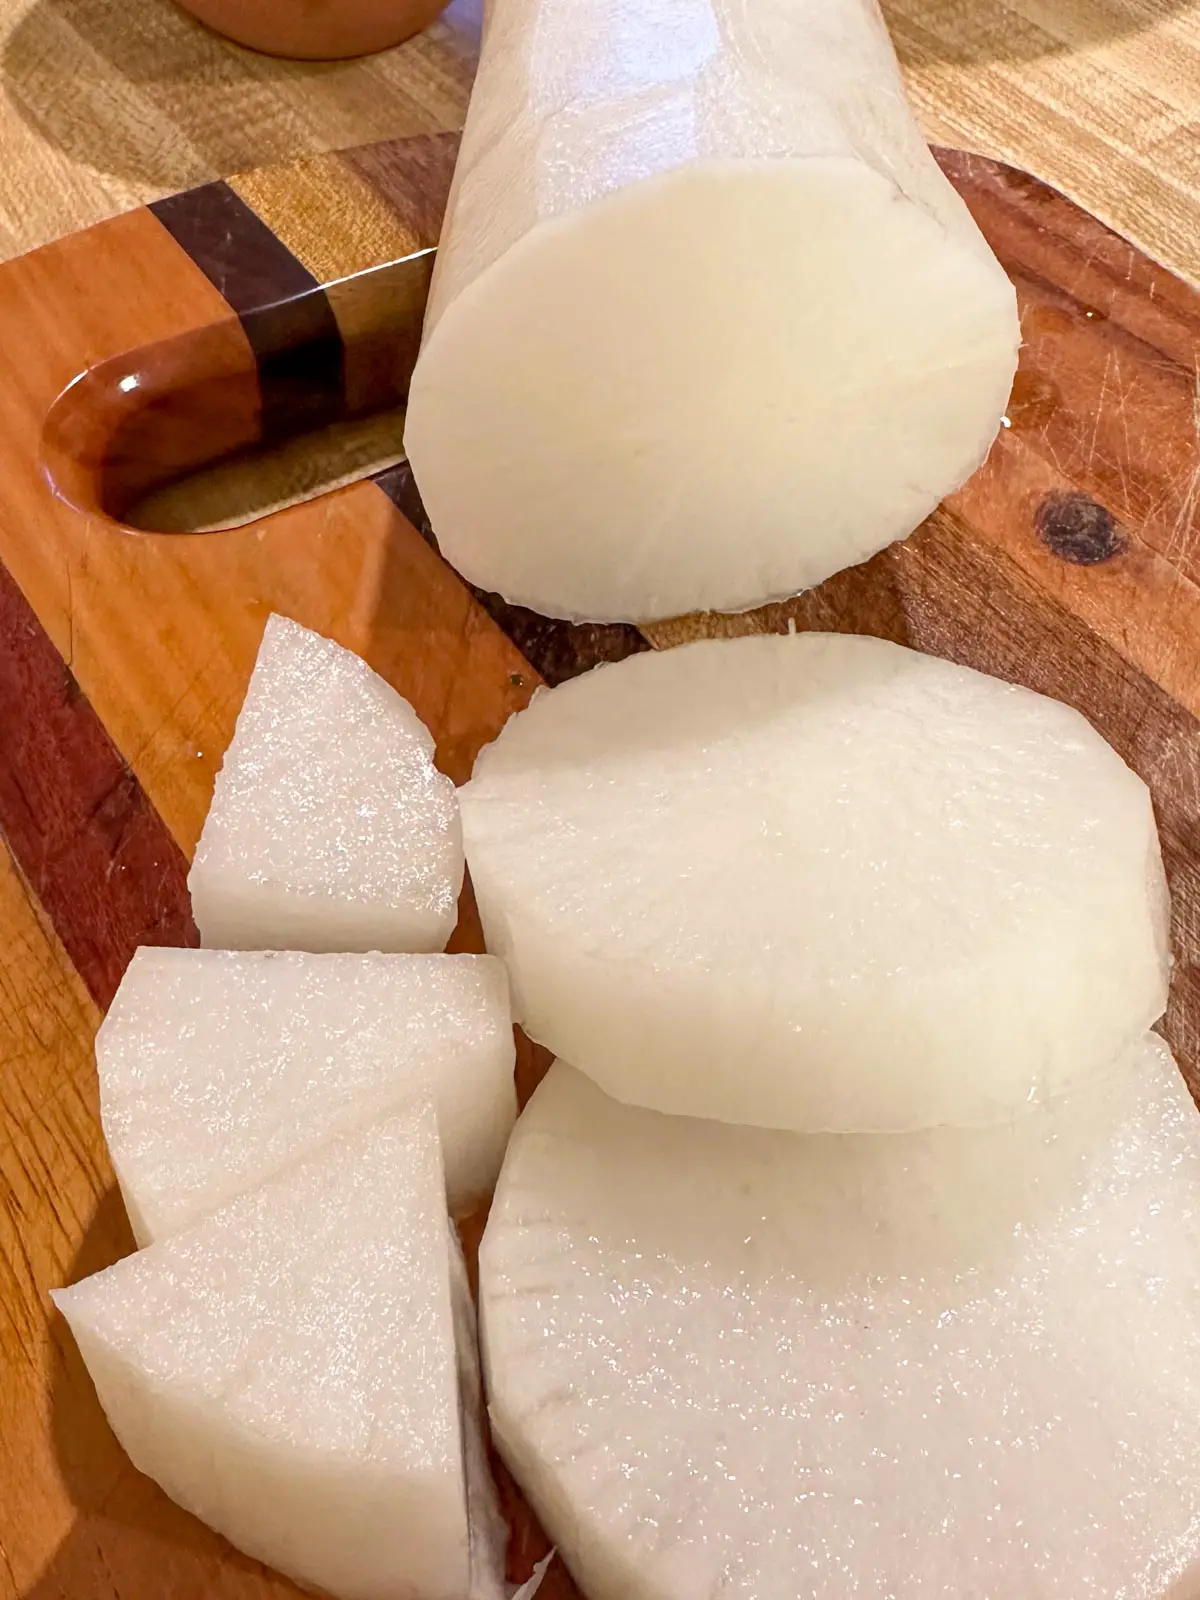 A peeled daikon radish which has been cut. There are small cubed pieces, 2 disc shaped pieces, and a tube shaped piece on top of a cutting board.